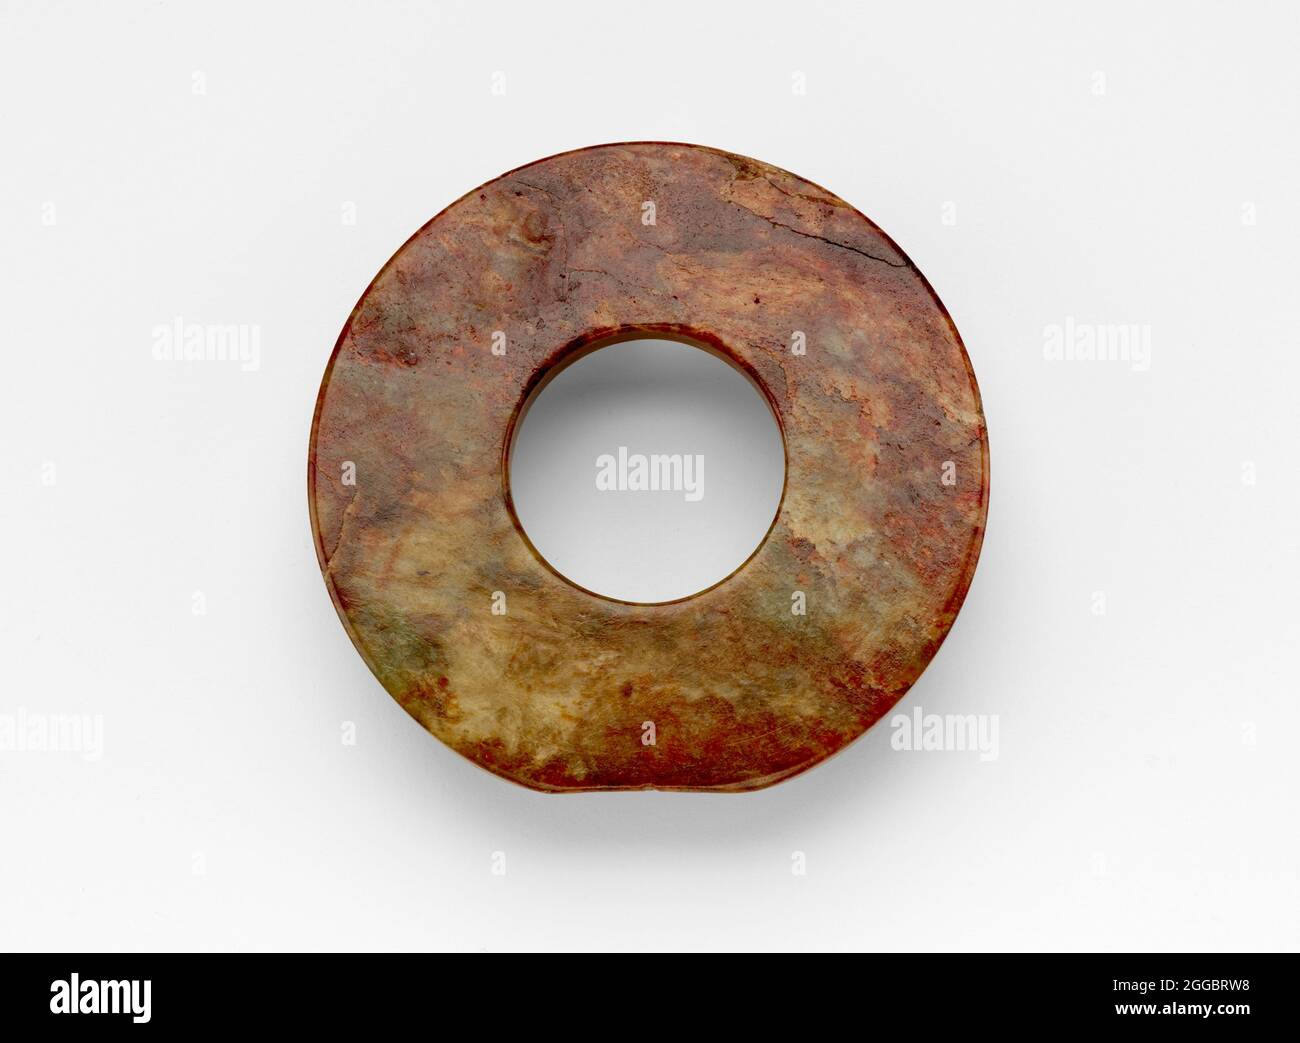 Disk (bi ?), Late Neolithic period, ca. 2500-2000 BCE. Stock Photo